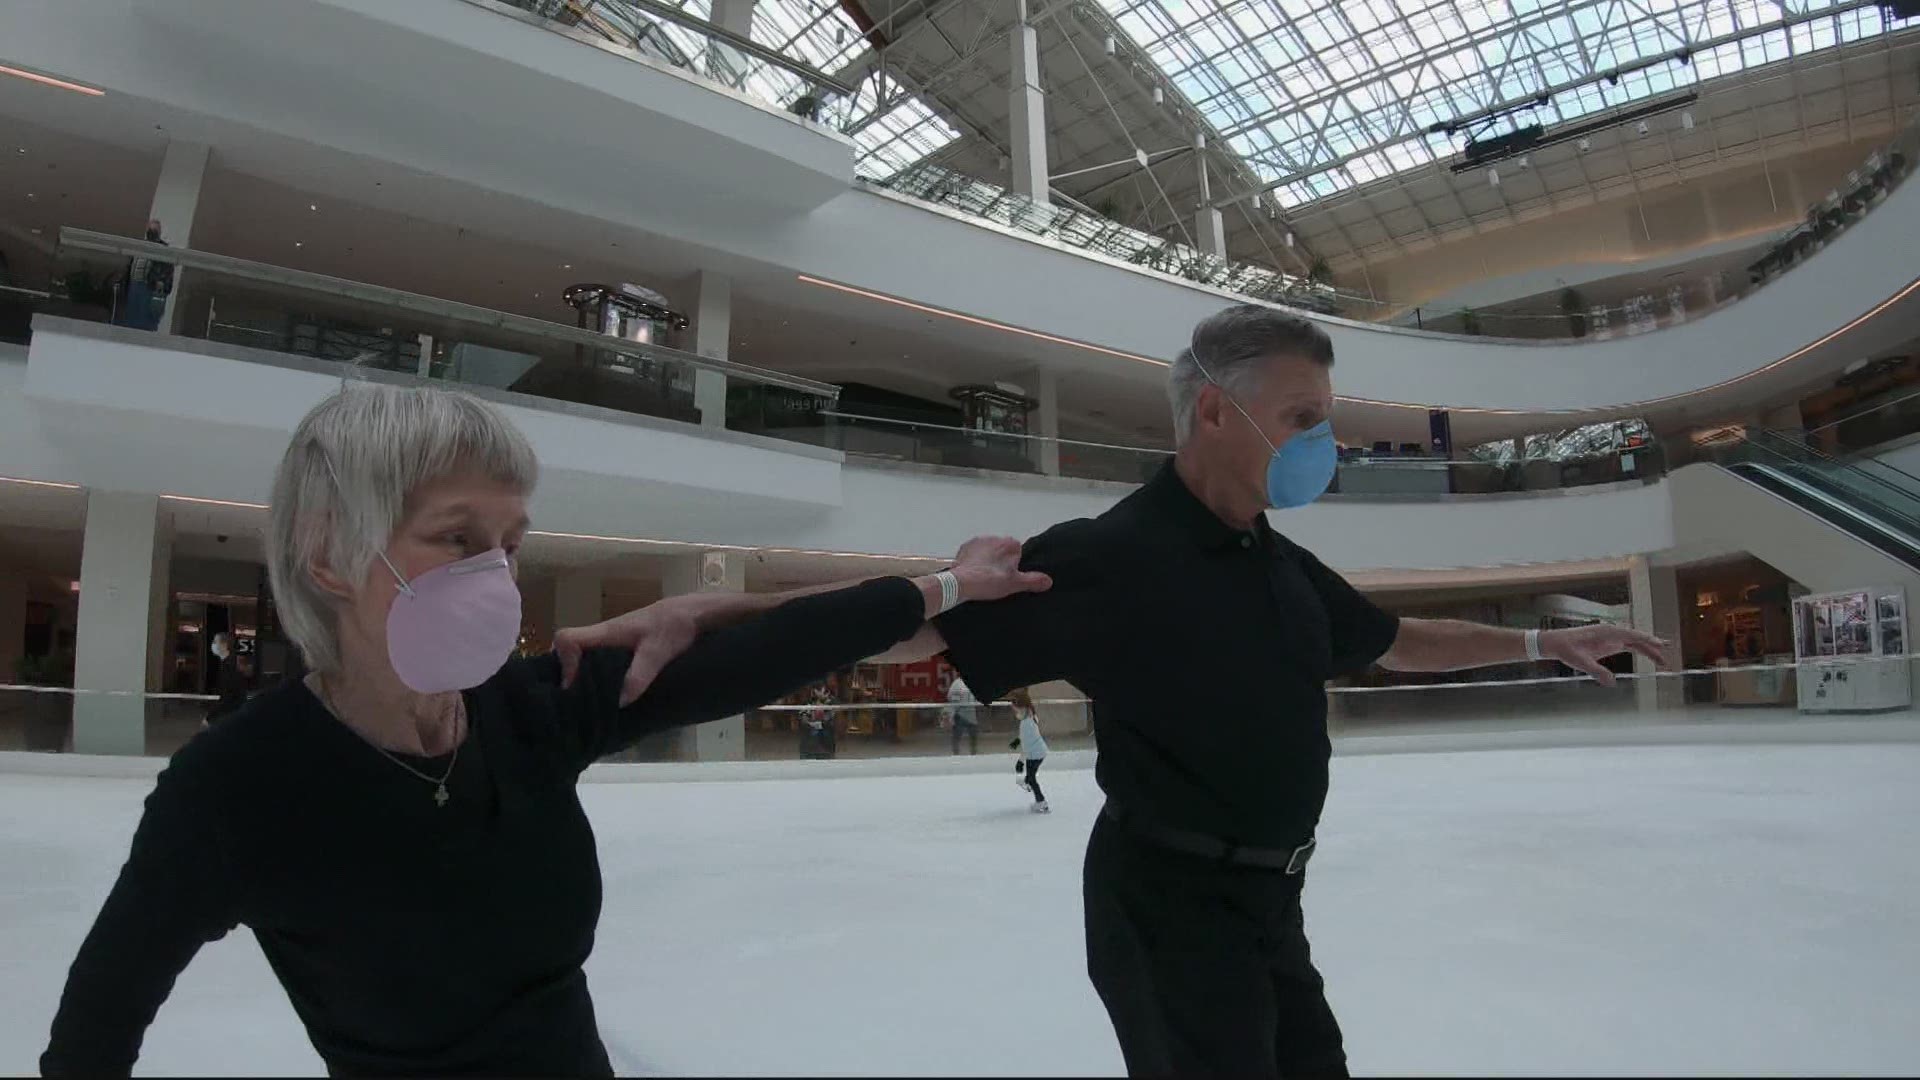 Jerry and Tally Leonard will celebrate their 50th wedding anniversary later this year, and just last week, they celebrated their 54th skating anniversary!